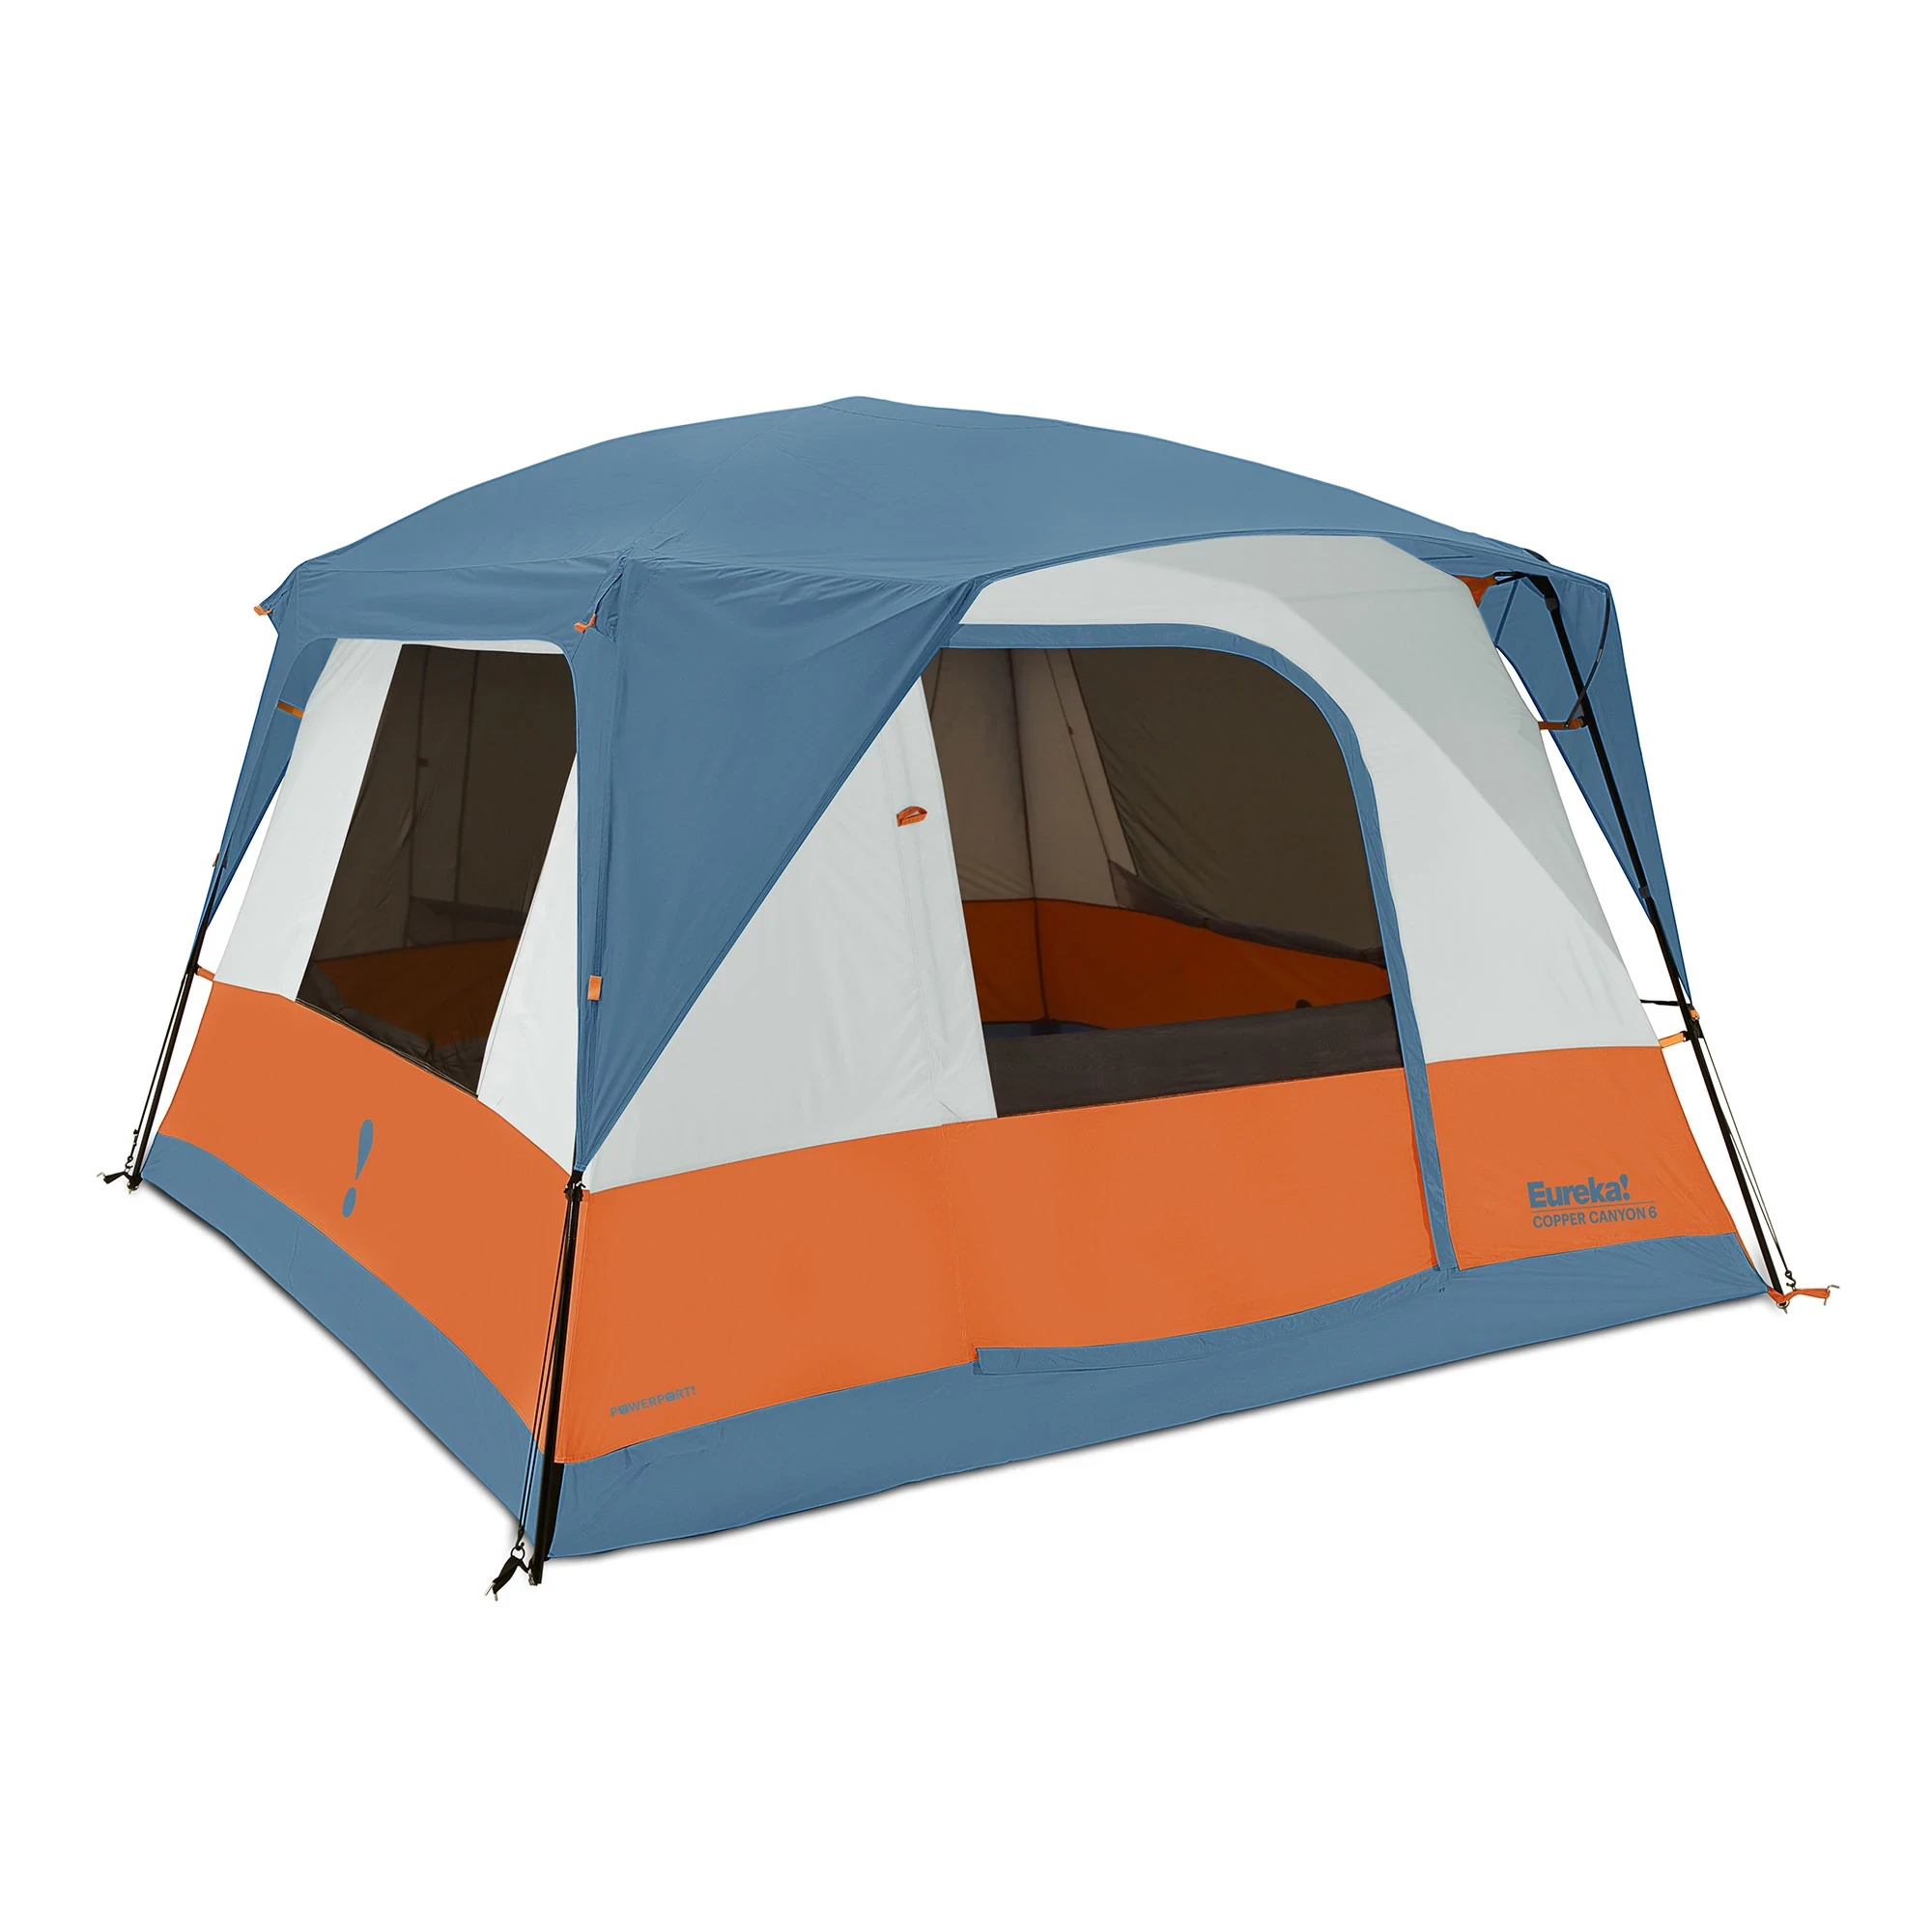 Copper Canyon LX 6 Tent with rainfly and window open